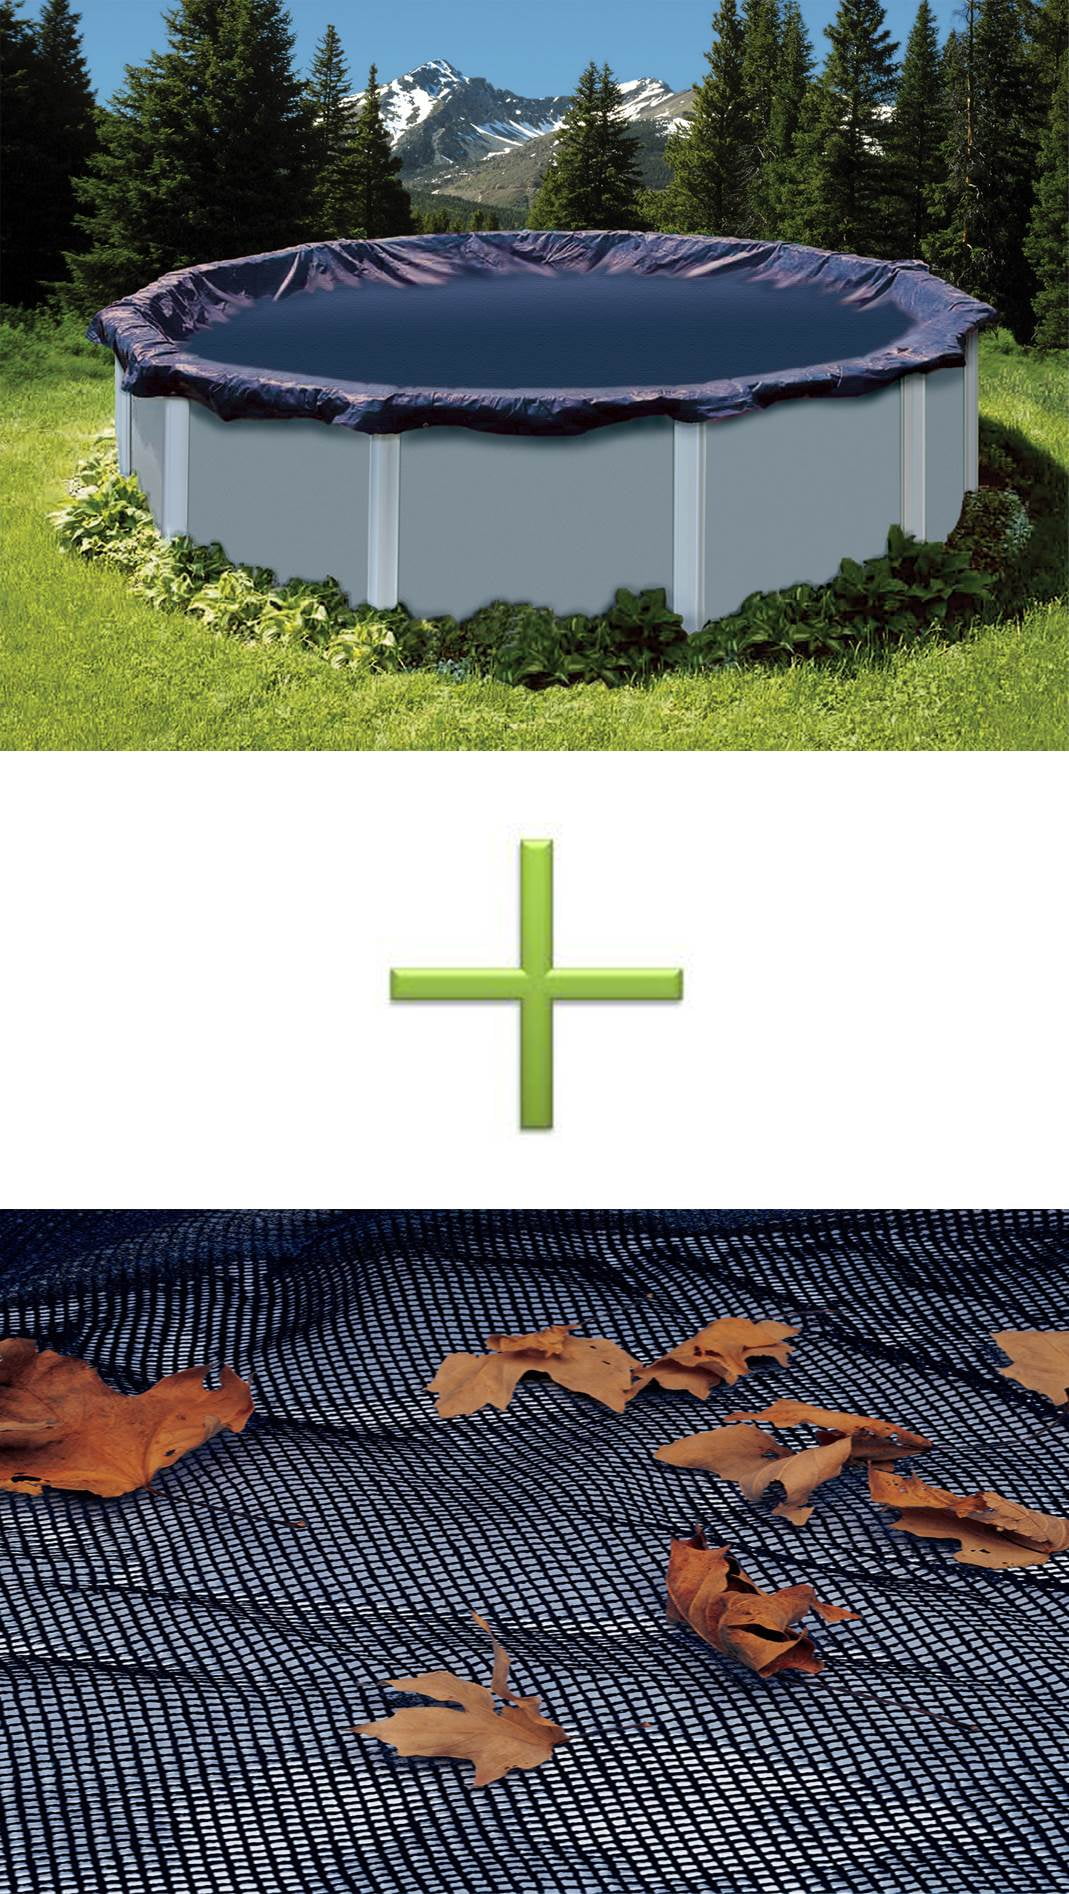 Swimline 15' Deluxe Round Above Ground Swimming Pool Winter Cover w/ Leaf Net